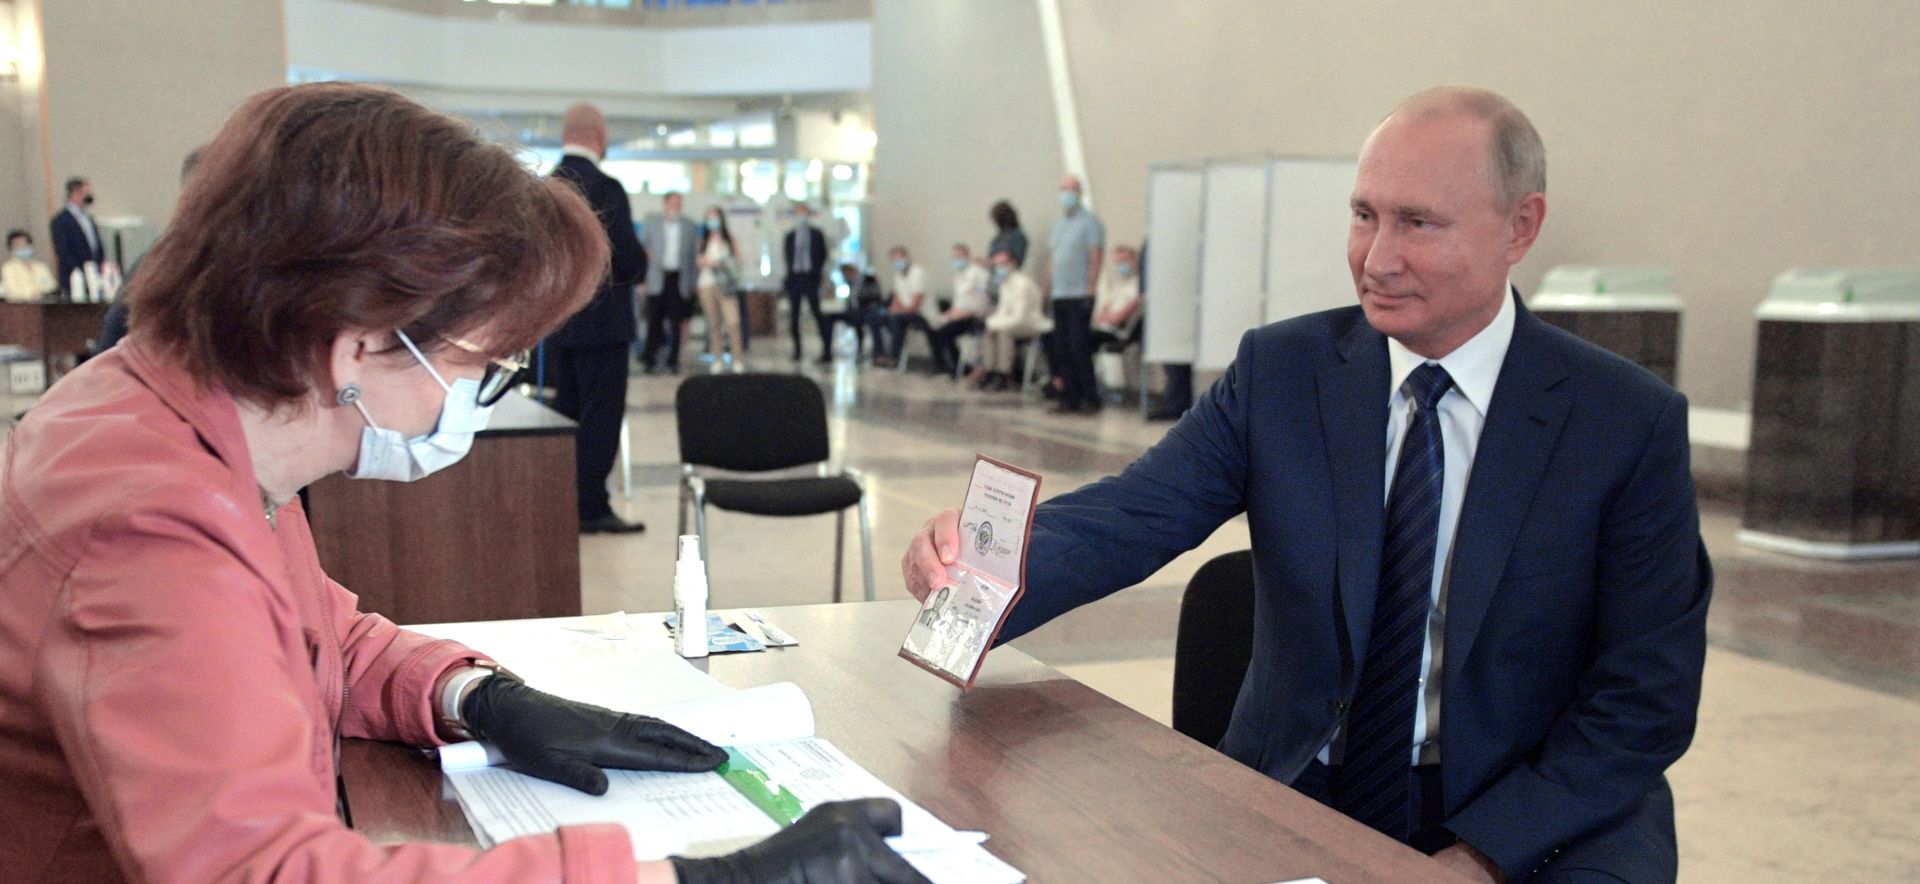 epa08519807 Russian President Vladimir Putin (R) shows his passport while taking part in a nationwide vote on amendments to the Russian Constitution during the main day of vote at a polling station in Moscow, Russia, 01 July 2020. The polling stations were opened for vote on 25 June to avoid crowding amid ongoing COVID-19 disease in Russia.  EPA/ALEXEI DRUZHININ / SPUTNIK / KREMLIN POOL MANDATORY CREDIT